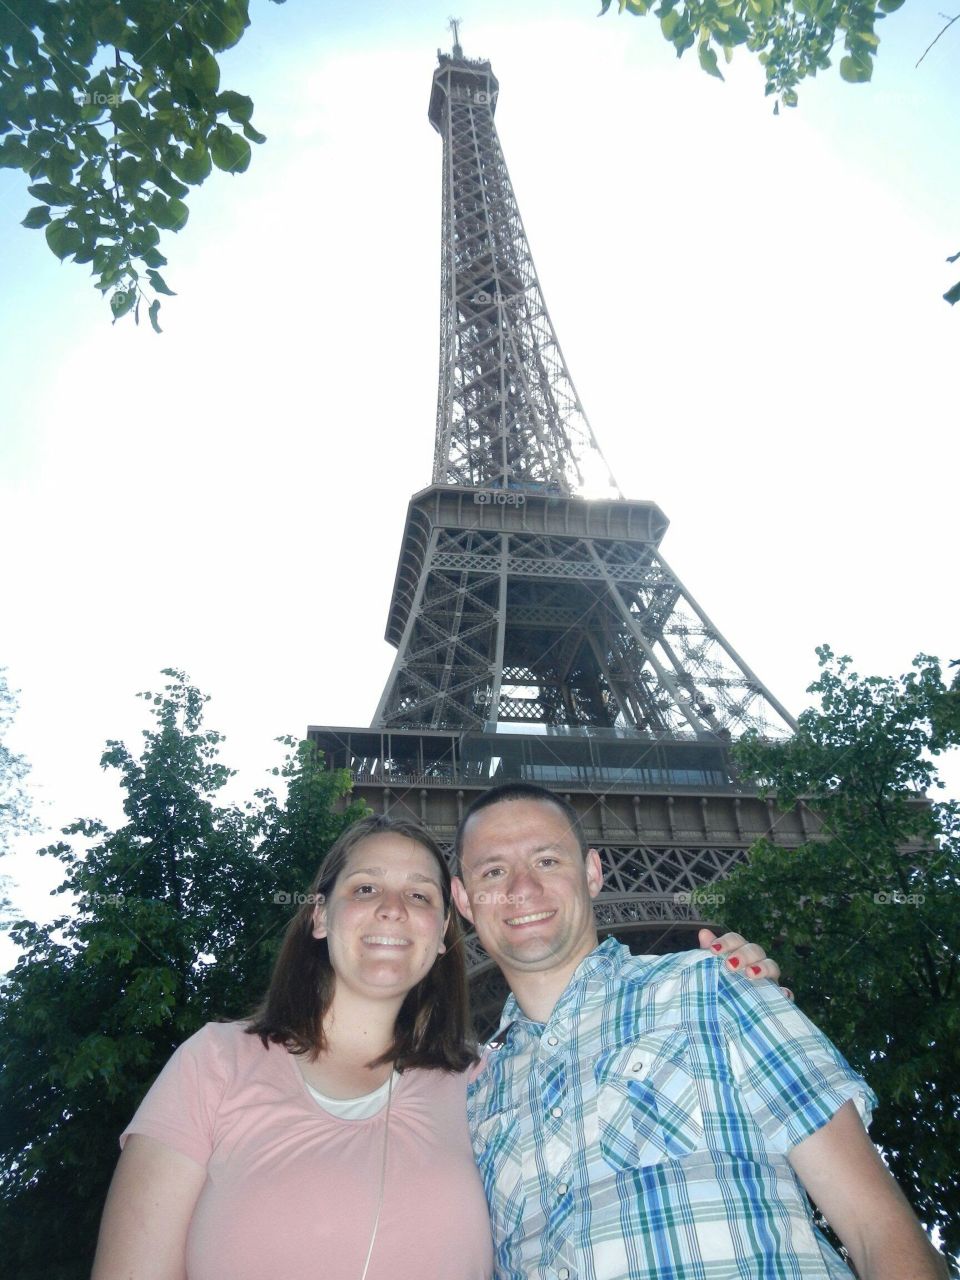 The Eiffel Tower, Paris, France. 6th Wedding Anniversary. Robert and Chelsea Merkley. May 2012. Copyright © CM Photography 2012 🇫🇷